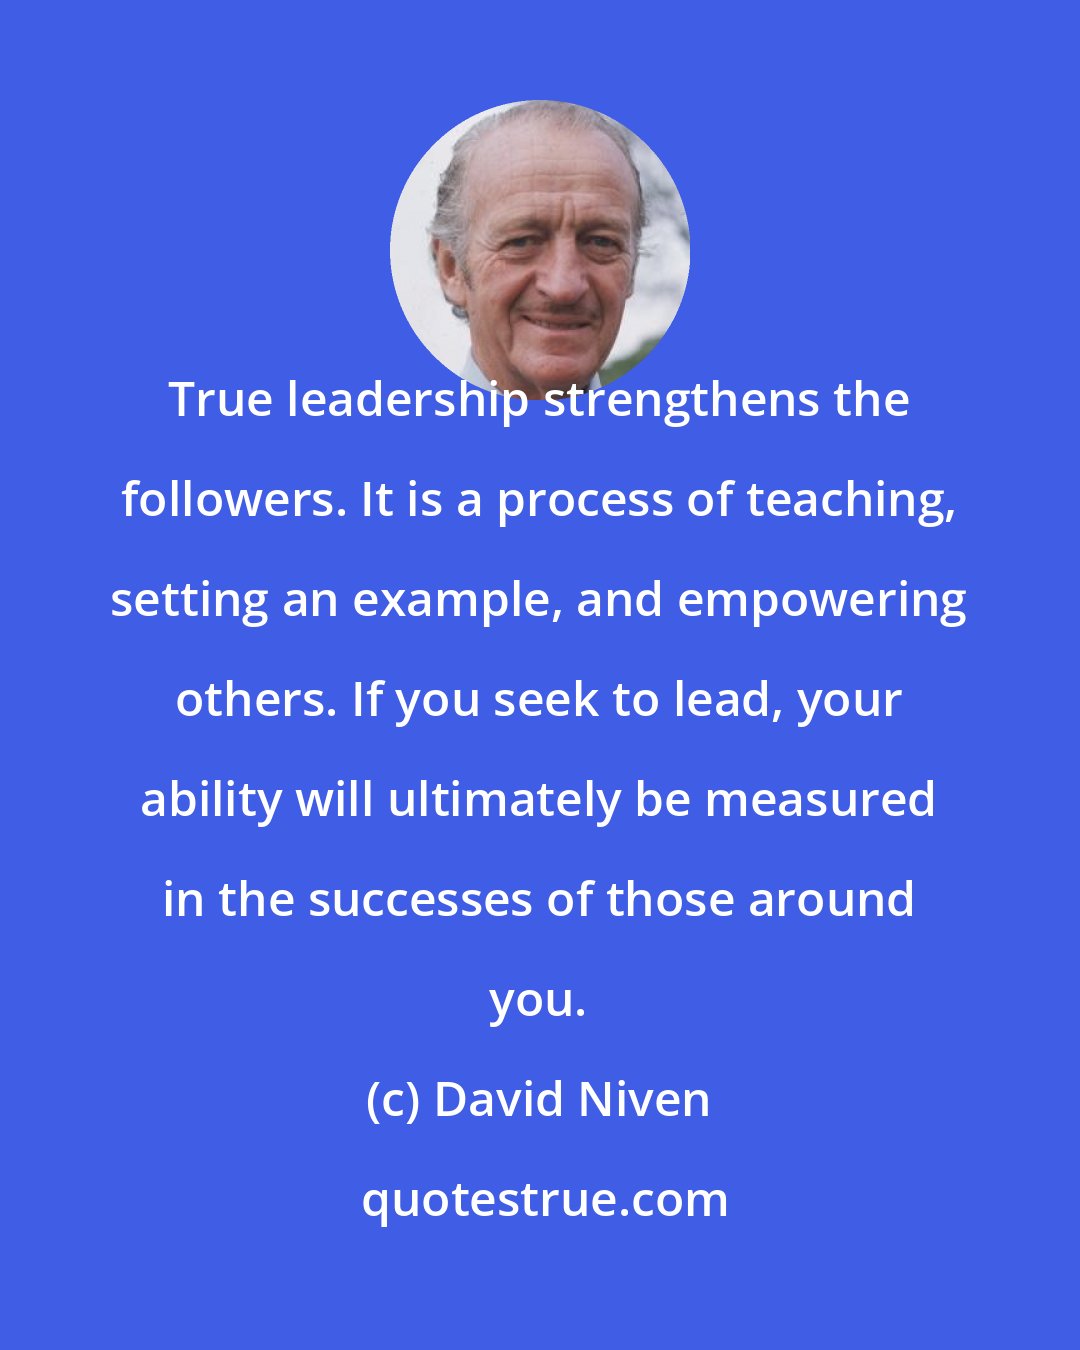 David Niven: True leadership strengthens the followers. It is a process of teaching, setting an example, and empowering others. If you seek to lead, your ability will ultimately be measured in the successes of those around you.